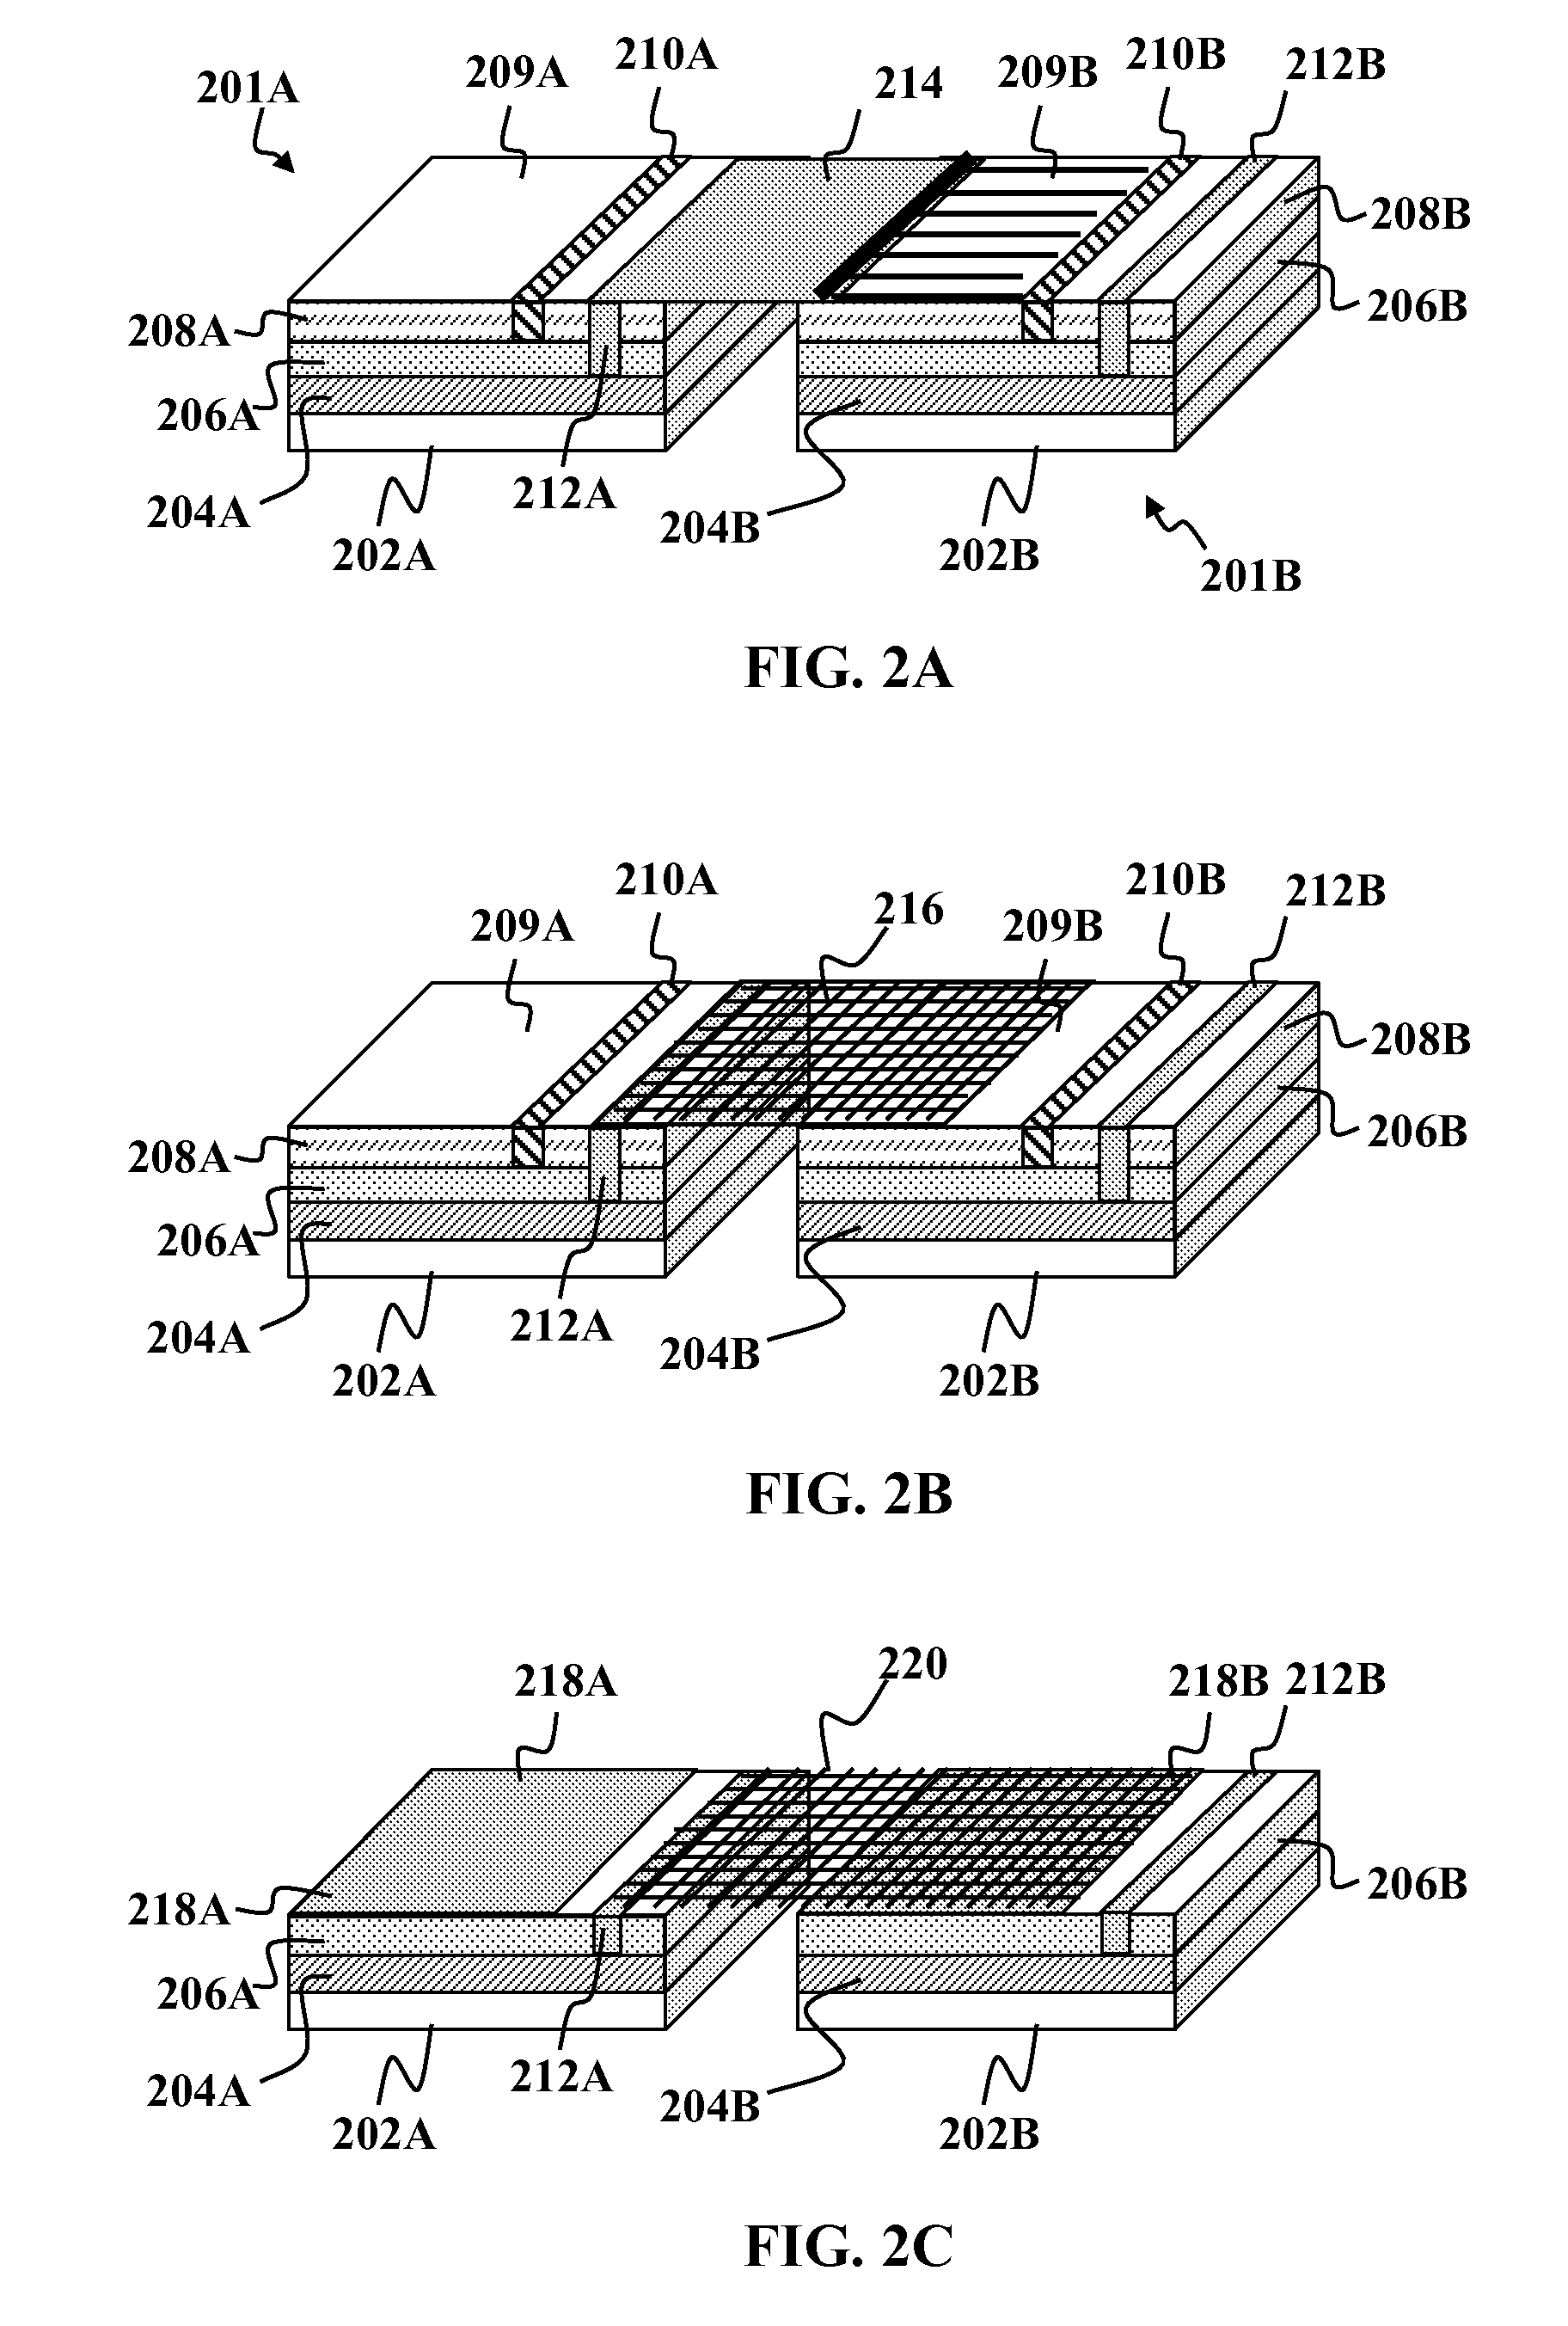 Manufacturing of optoelectronic devices